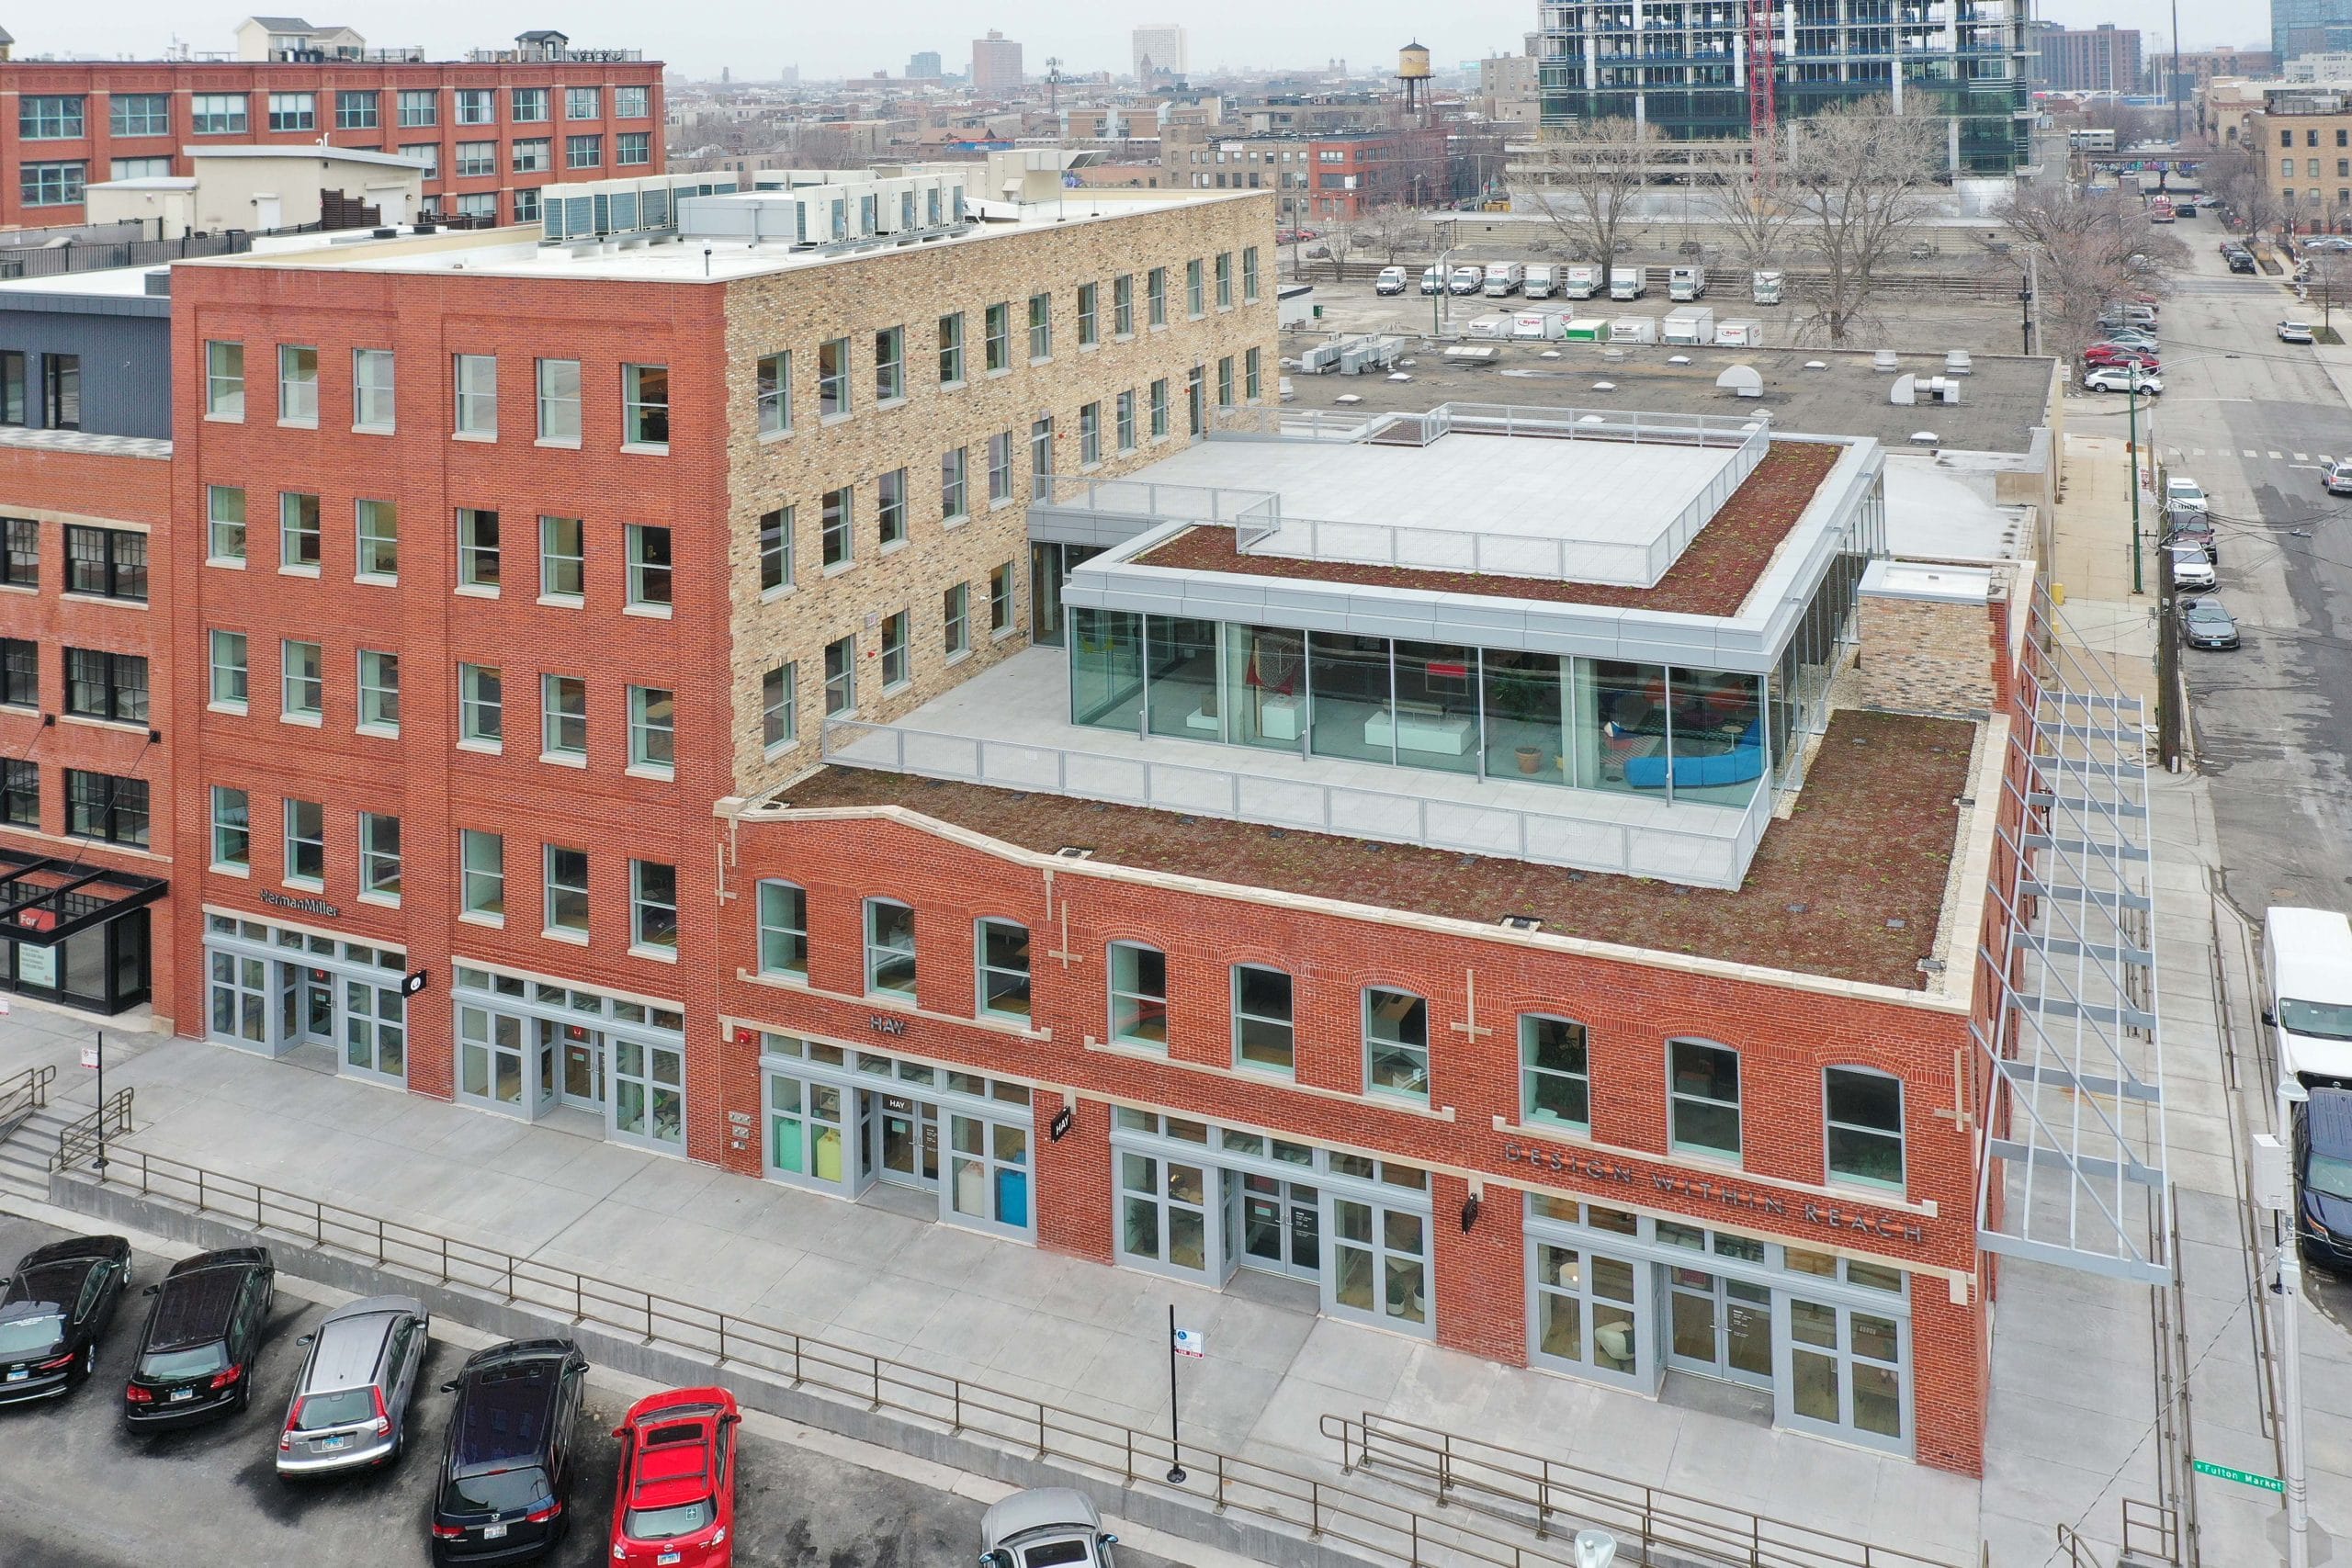 Skender Completes Construction at 1100 W. Fulton for Fulton St. Companies and Herman Miller